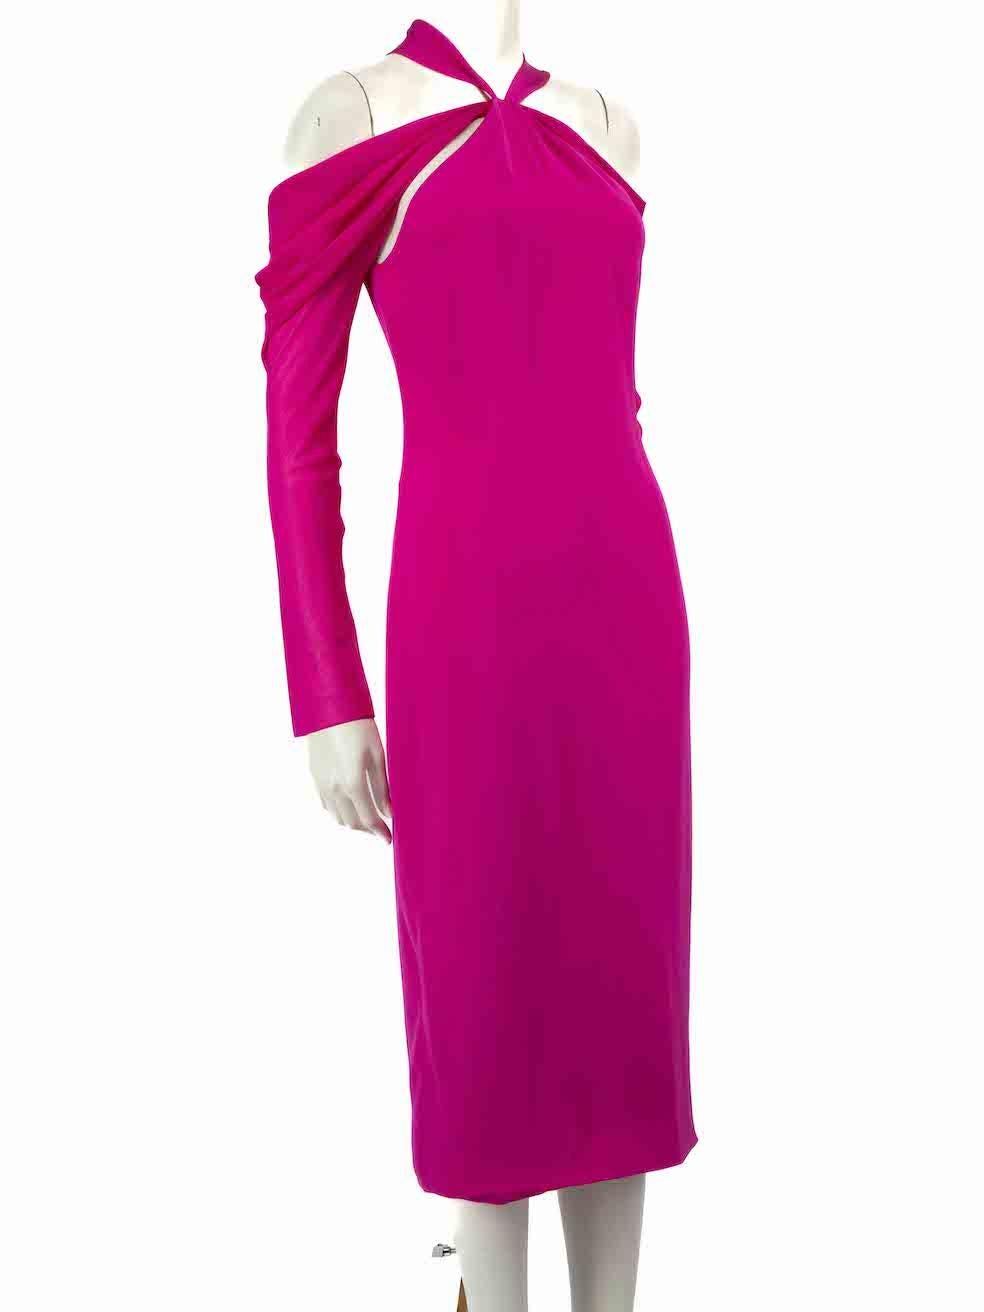 CONDITION is Very good. Hardly any visible wear to dress is evident on this used Cushnie et Ochs designer resale item.
 
 
 
 Details
 
 
 Fuchsia
 
 Silk
 
 Midi dress
 
 Halterneck
 
 Sheer long sleeves
 
 Cold shoulder
 
 Back zip closure with